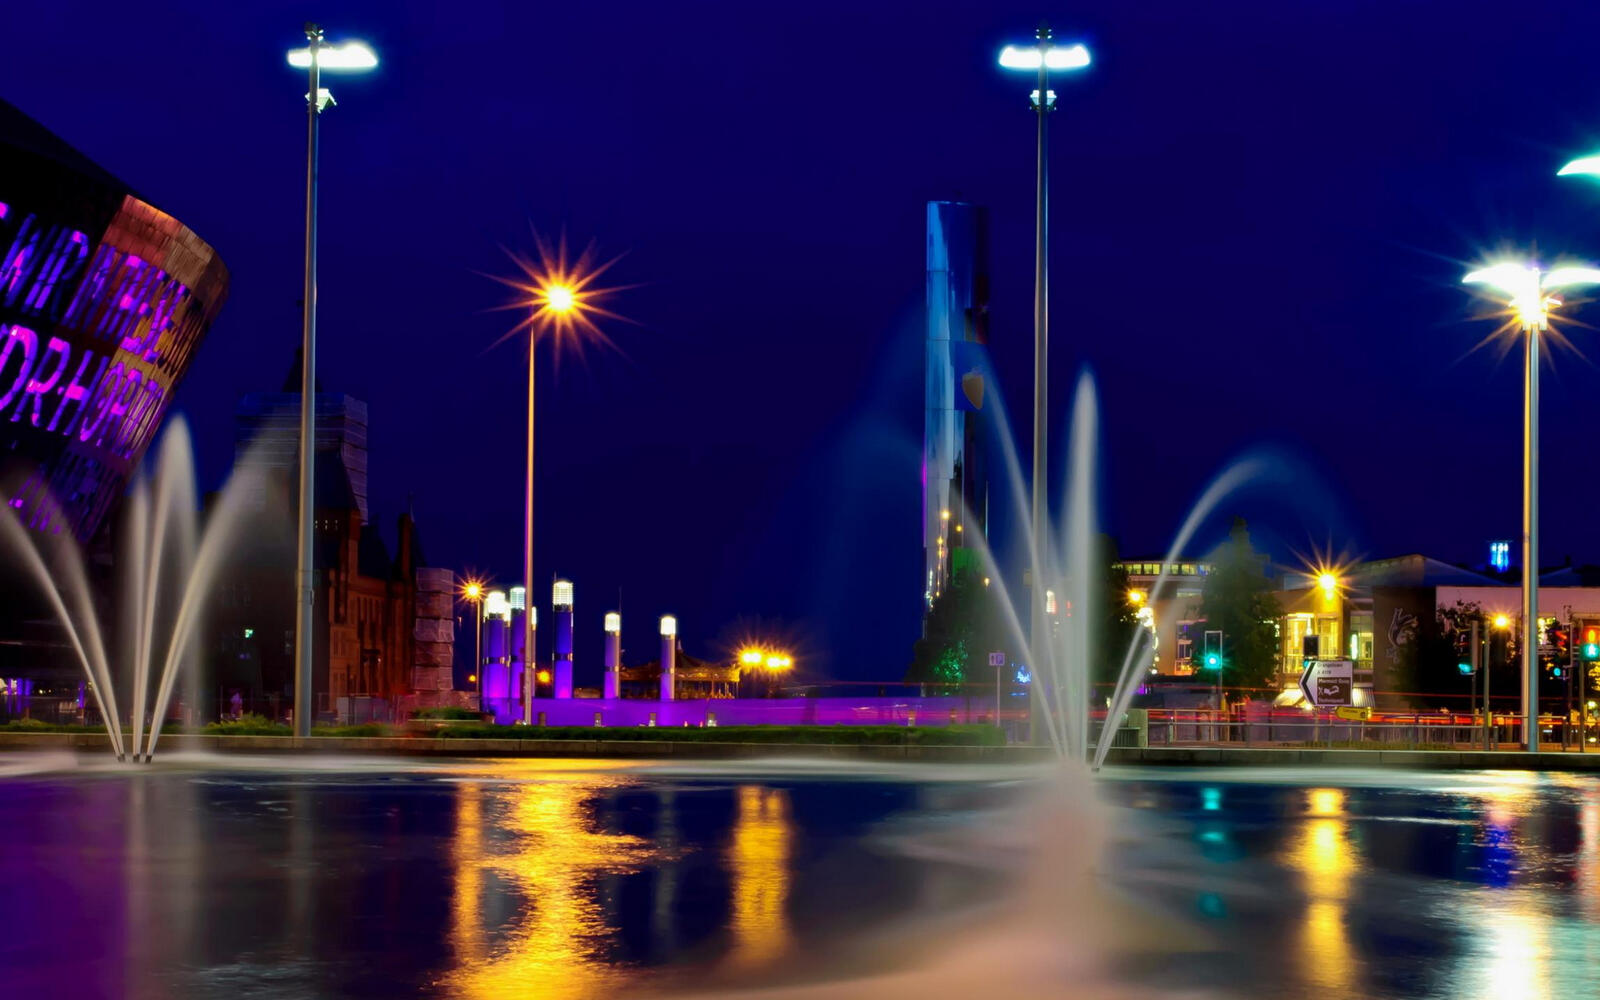 Wallpapers night fountain streams on the desktop